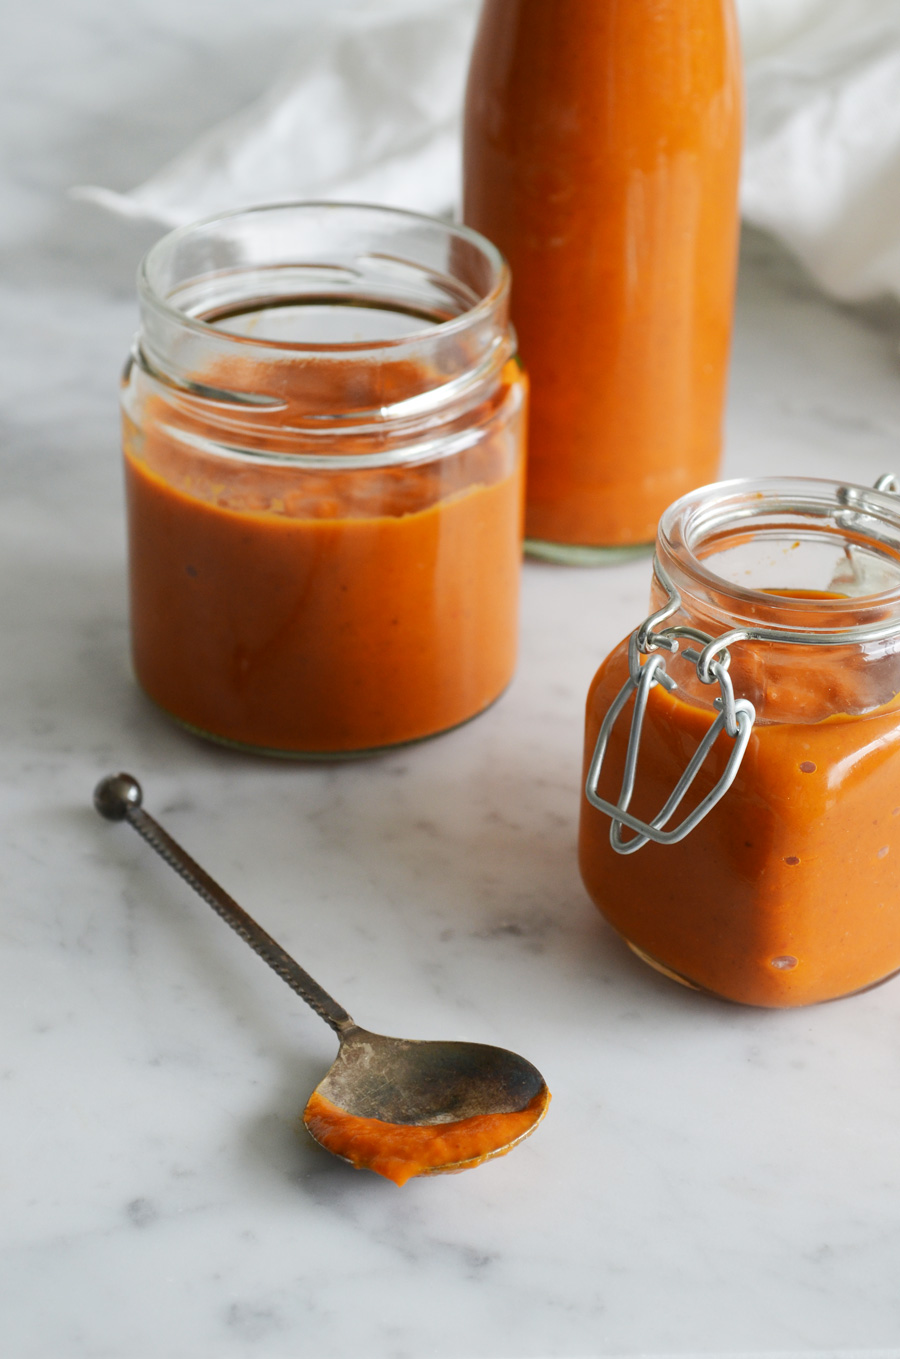 Spicy sugar free, vegan, gluten free, roasted red pepper ketchup, with no sugar or salt added